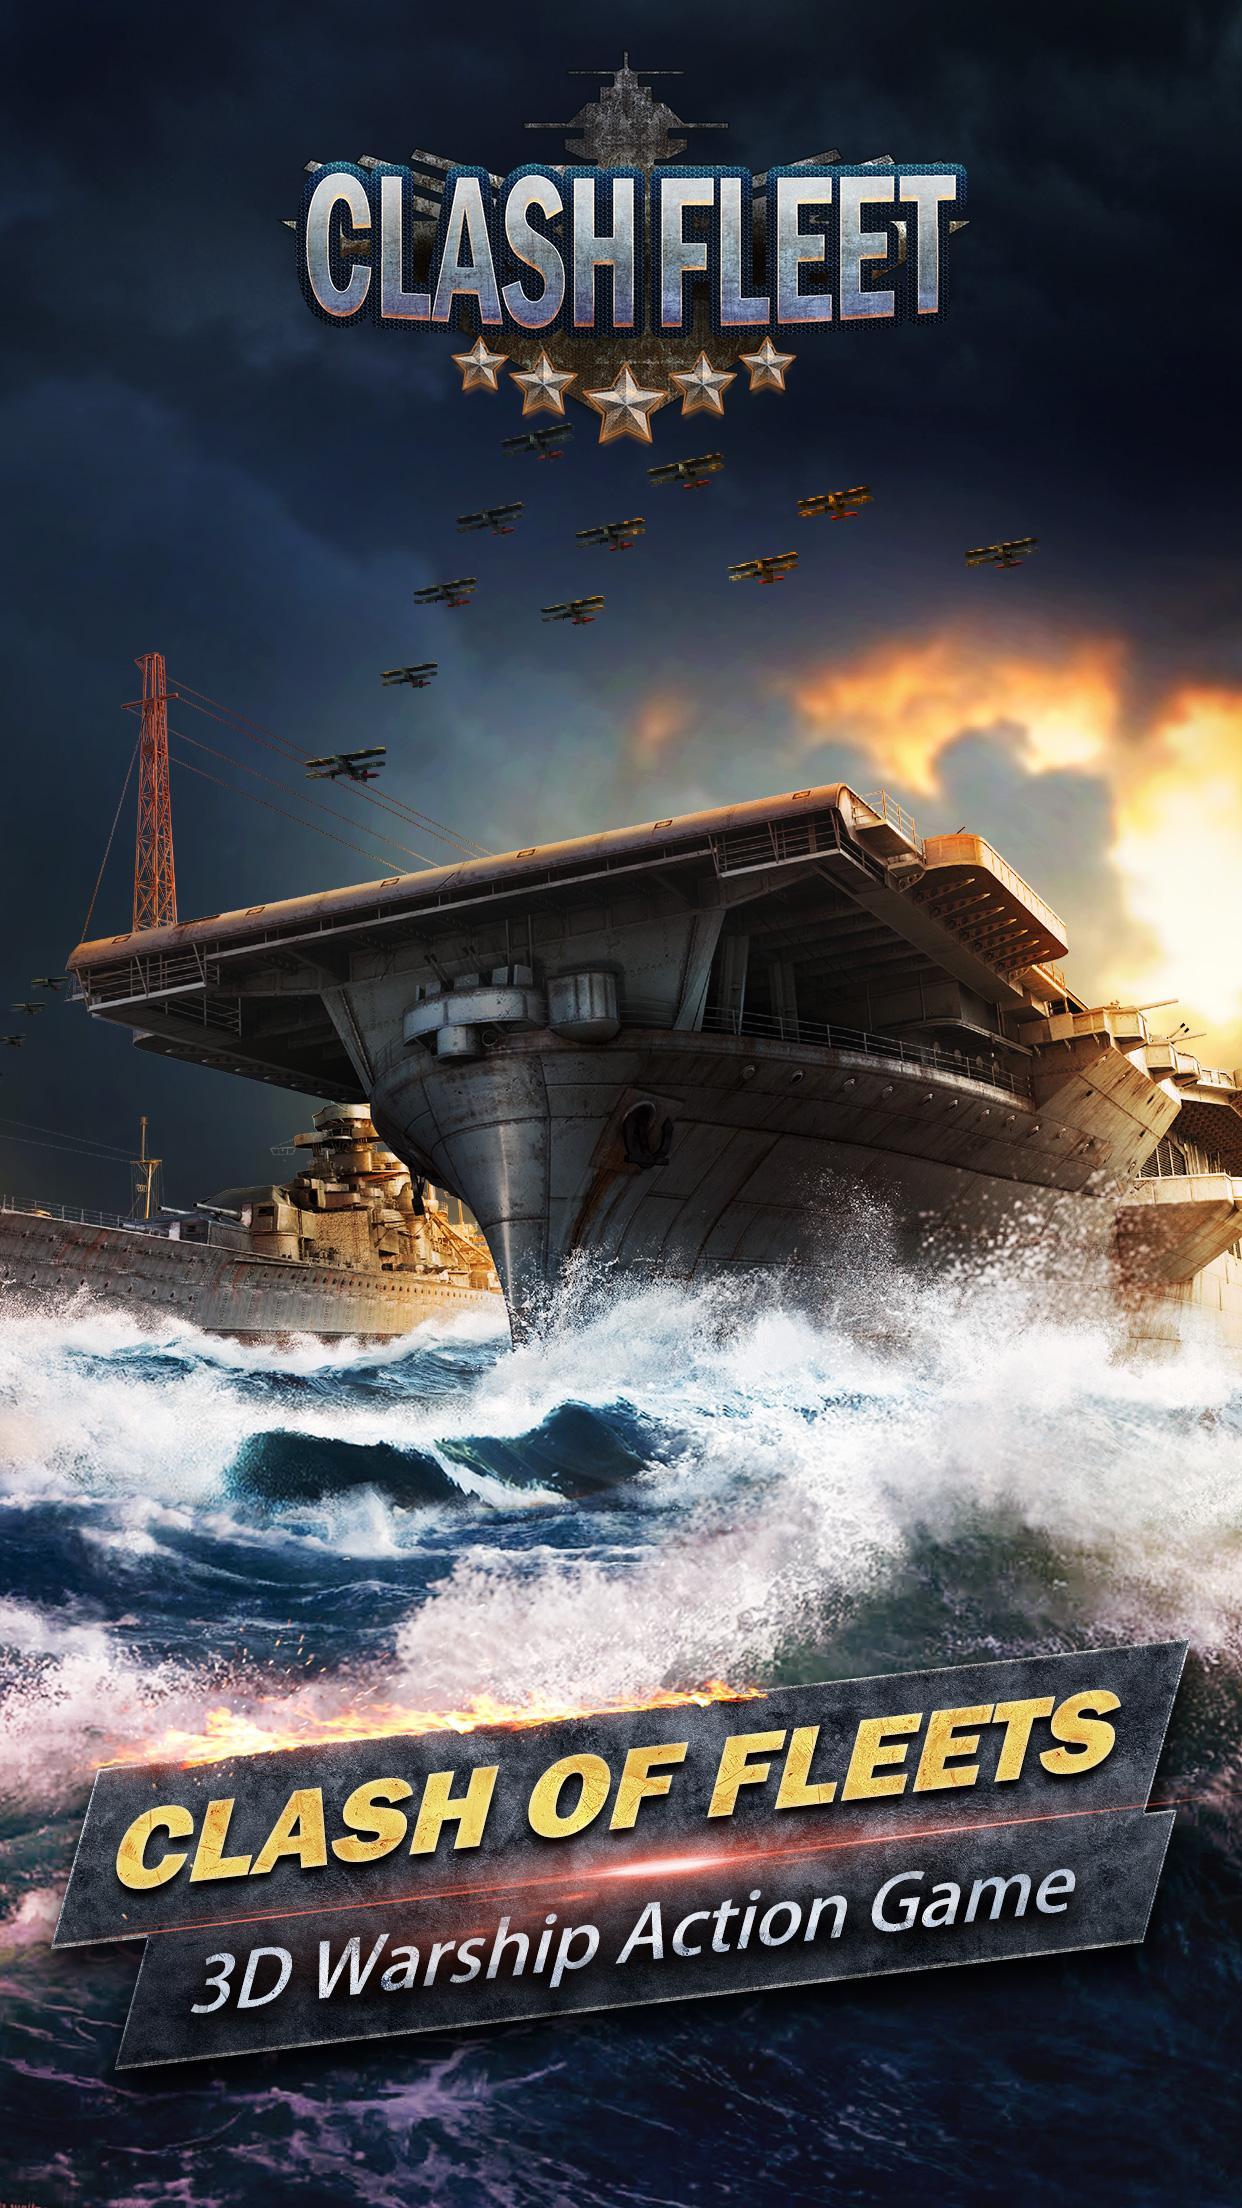 Clash Fleet 10 Vs 10 Real Time Fleet Battles For Android Apk Download